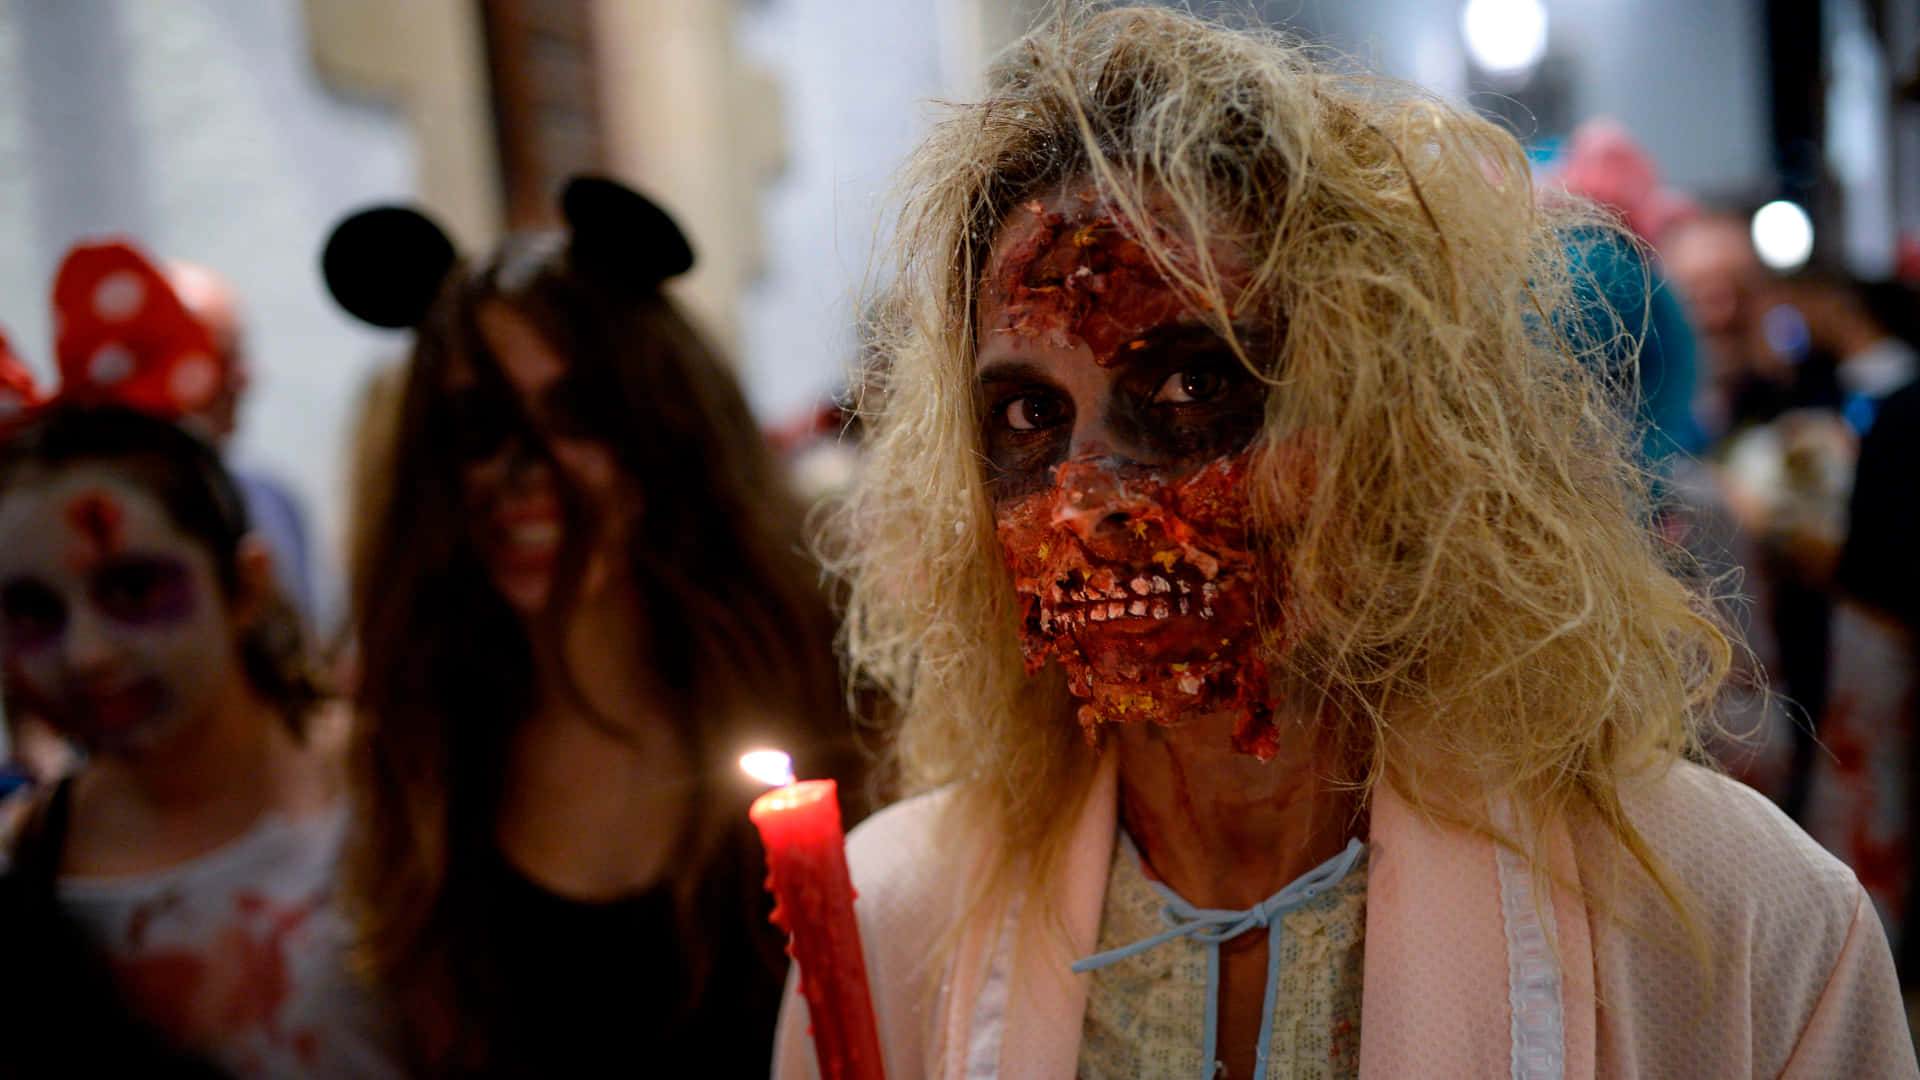 a woman dressed in a zombie costume